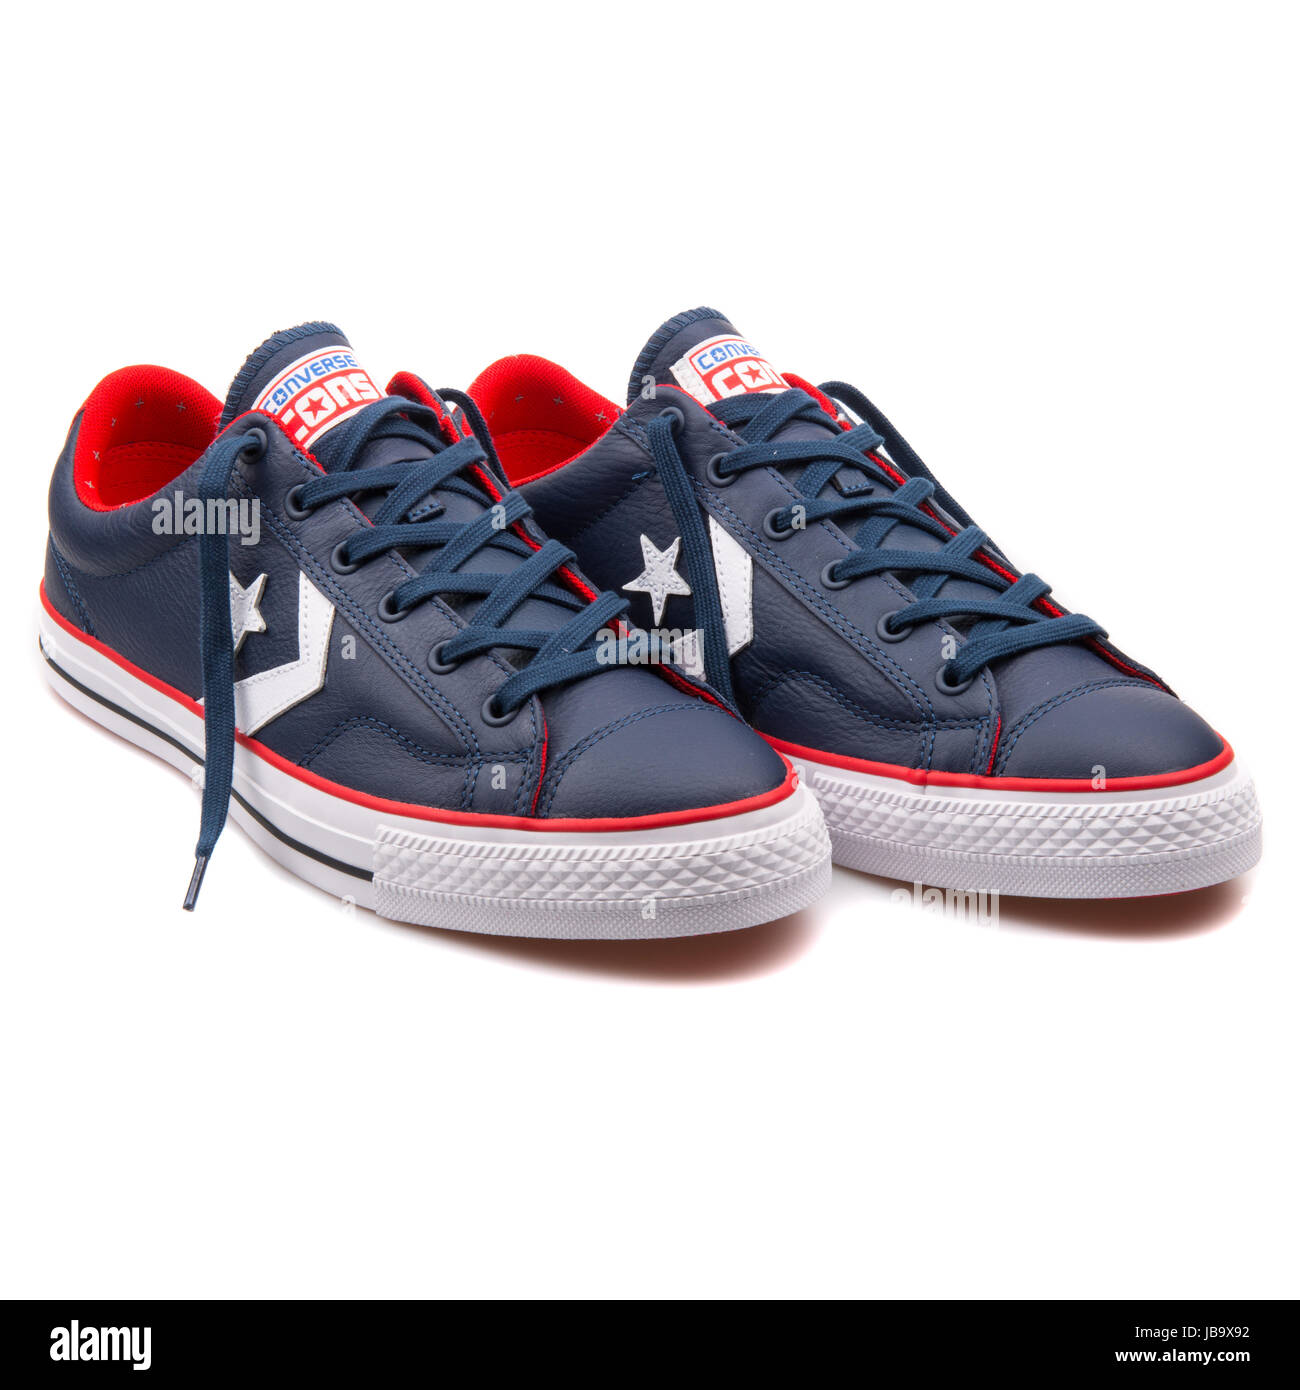 Converse Chuck Taylor All Star Player OX Nighttime Blue and Red Unisex  Shoes - 149772C Stock Photo - Alamy